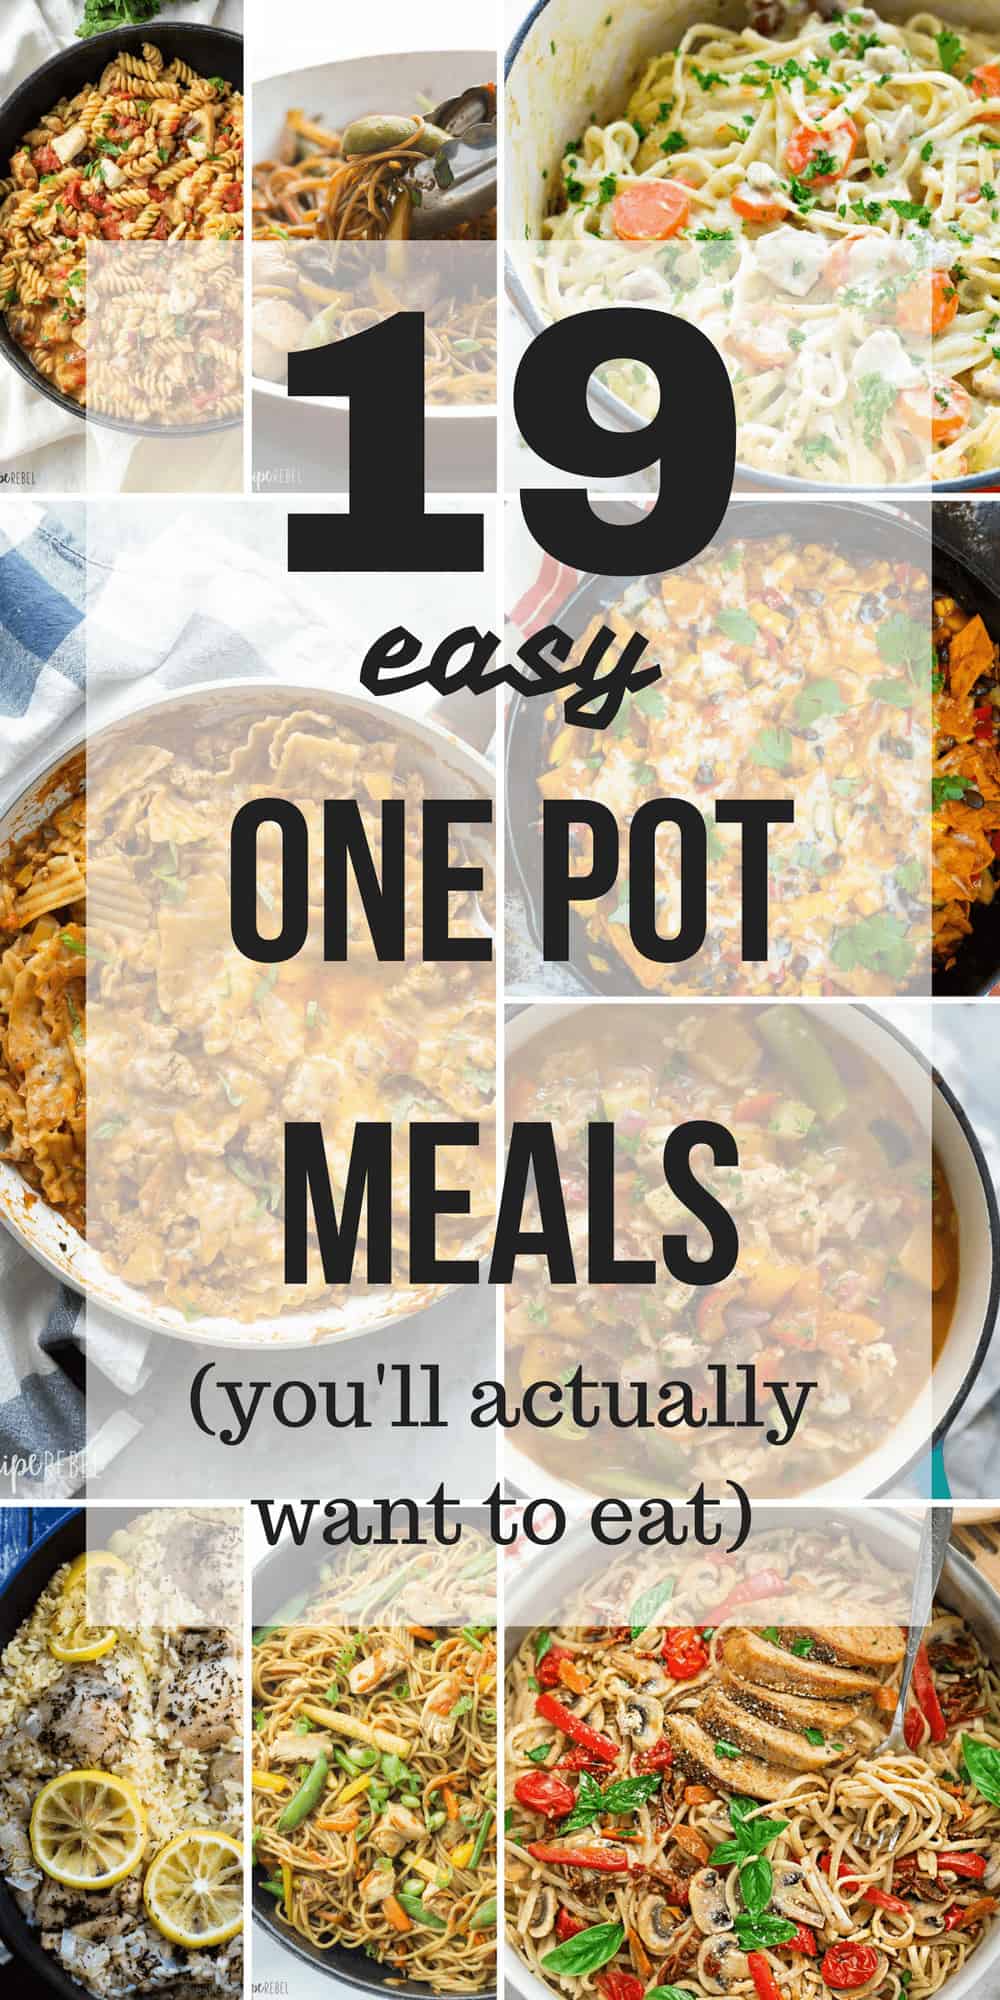 collage of multiple images of one pot meals with text